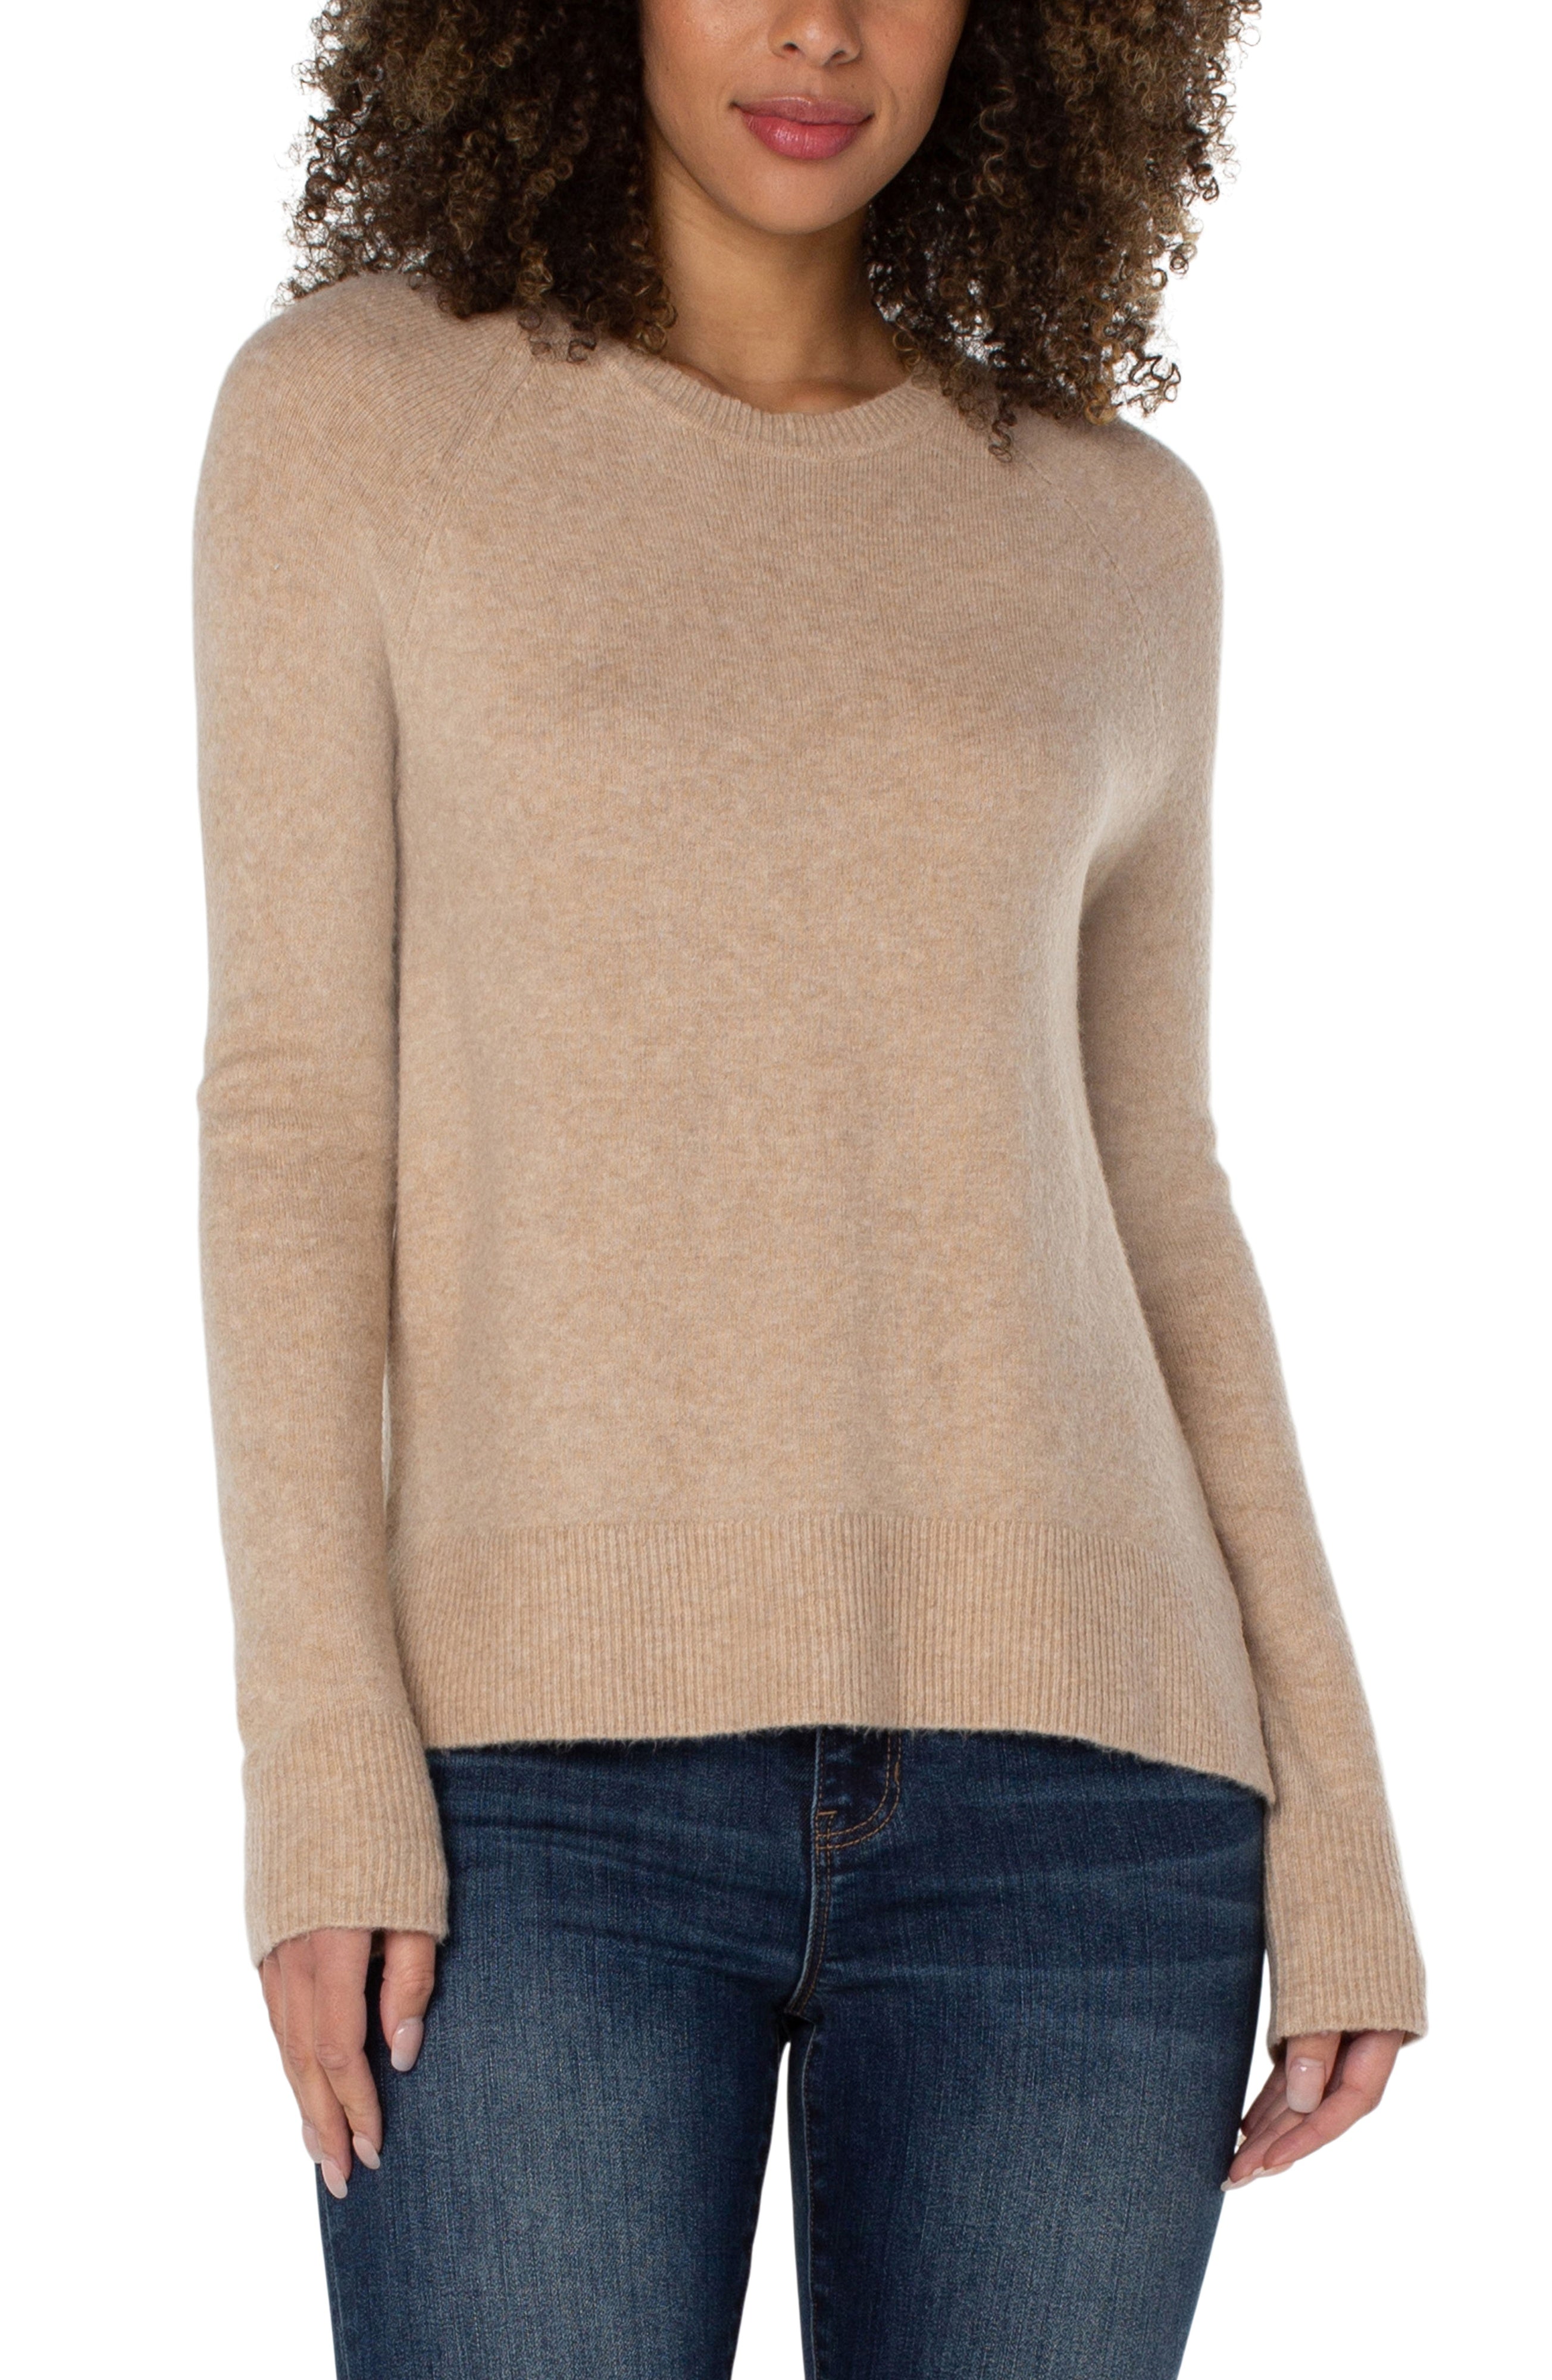 LPLA Heather Sweater with side slits